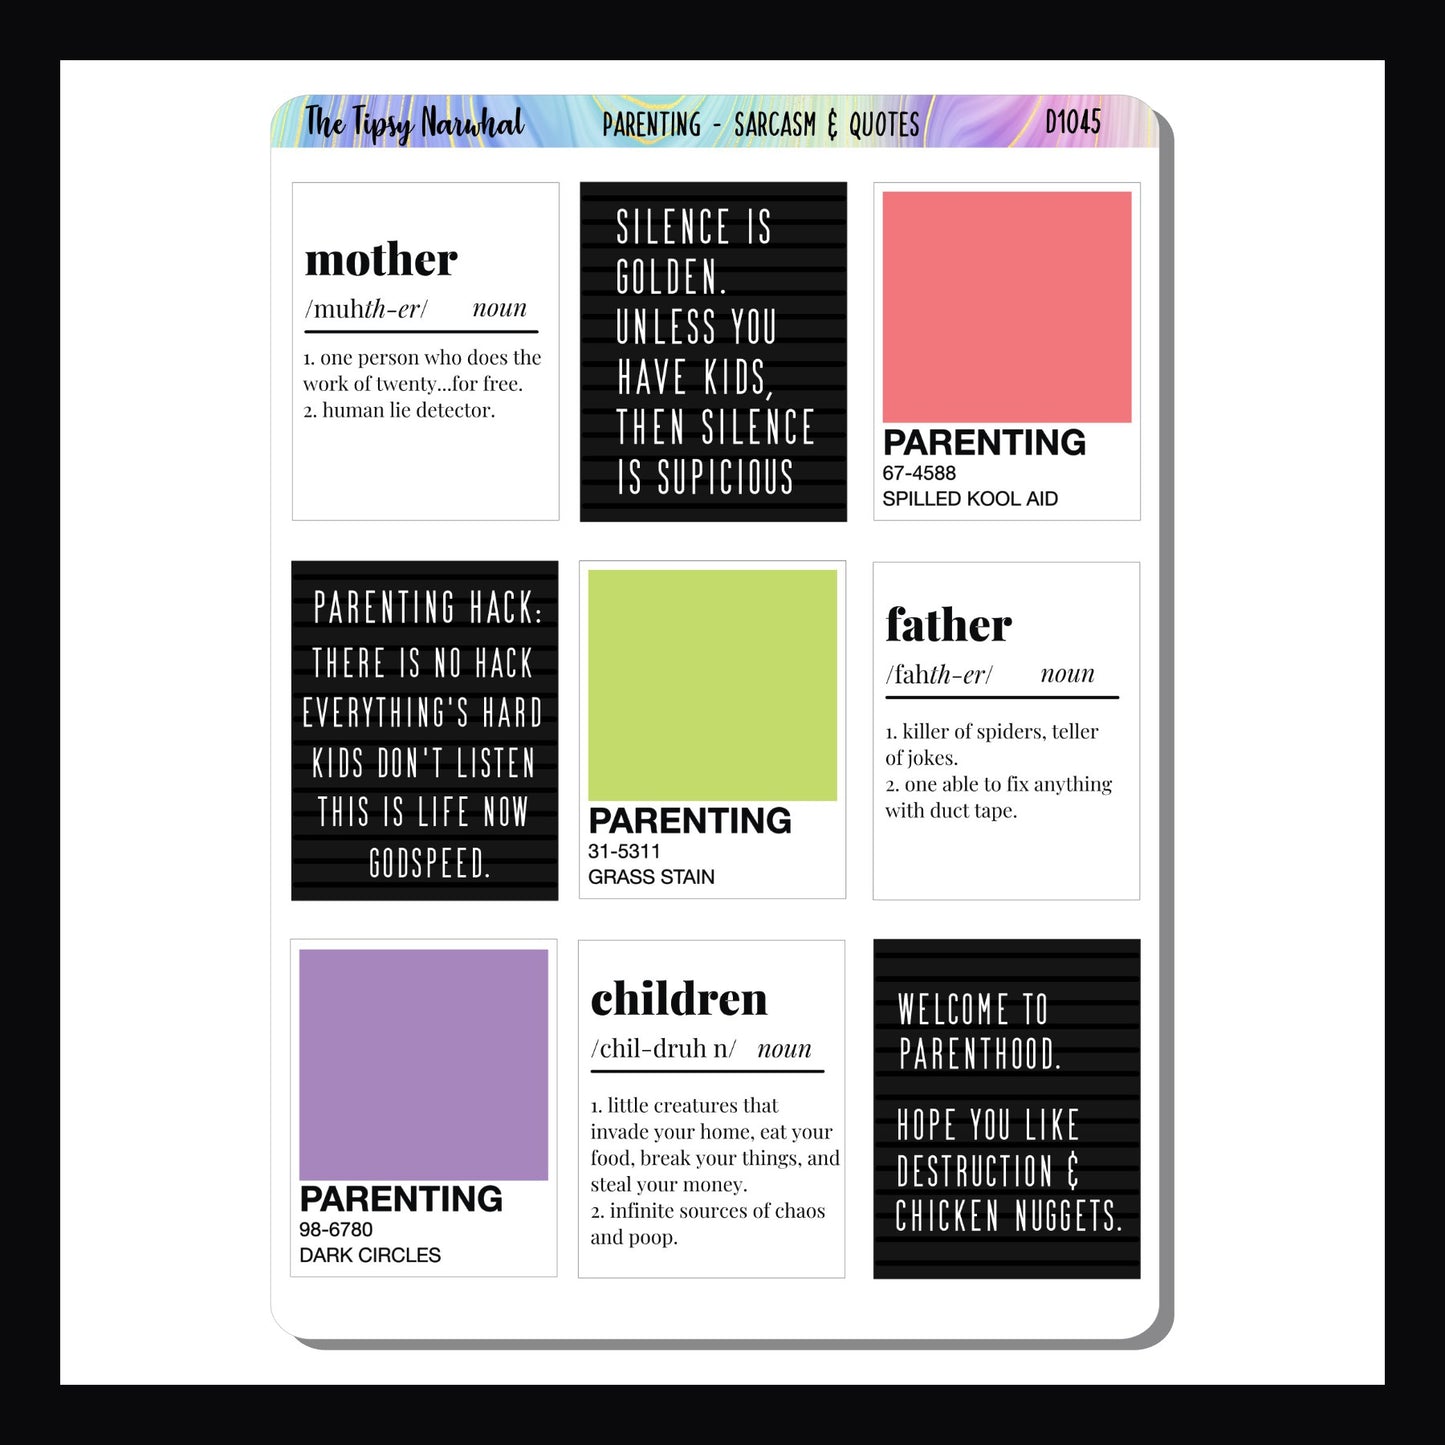 The Digital Parenting Sarcasm Sticker Sheet is a printable version of the parenting sarcasm sticker sheet.  It features 9 stickers featuring funny quotes about being a parent.